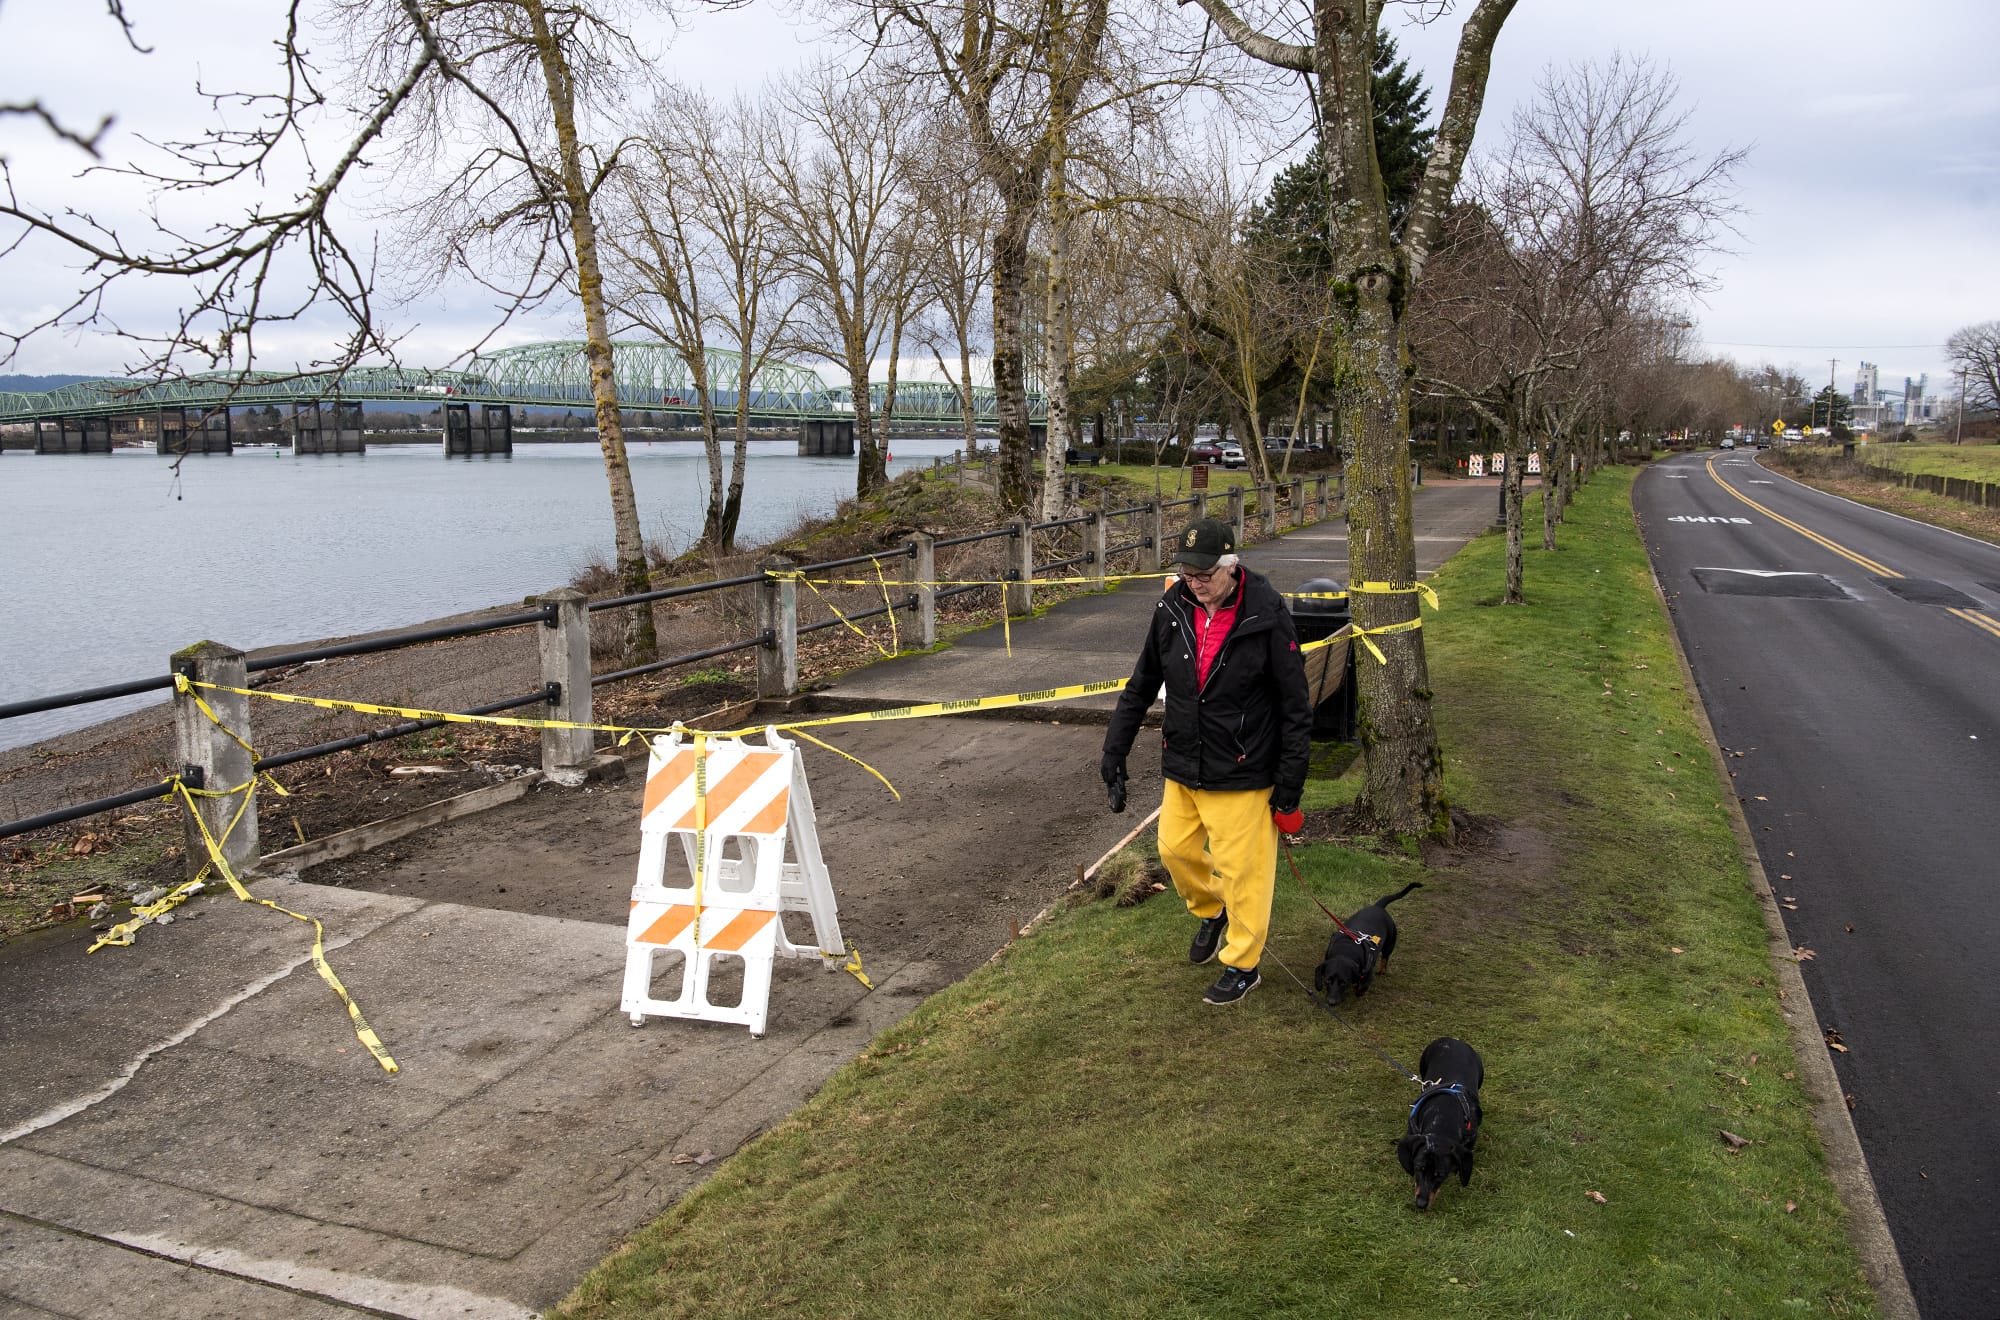 Sandy Robinson of Vancouver walks along the Waterfront Renaissance Trail with her miniature dachshunds in Vancouver on Jan. 8, 2020. Robinson said she walks the trail about once a week and the construction hasn't bothered her. "It needed it," she said.